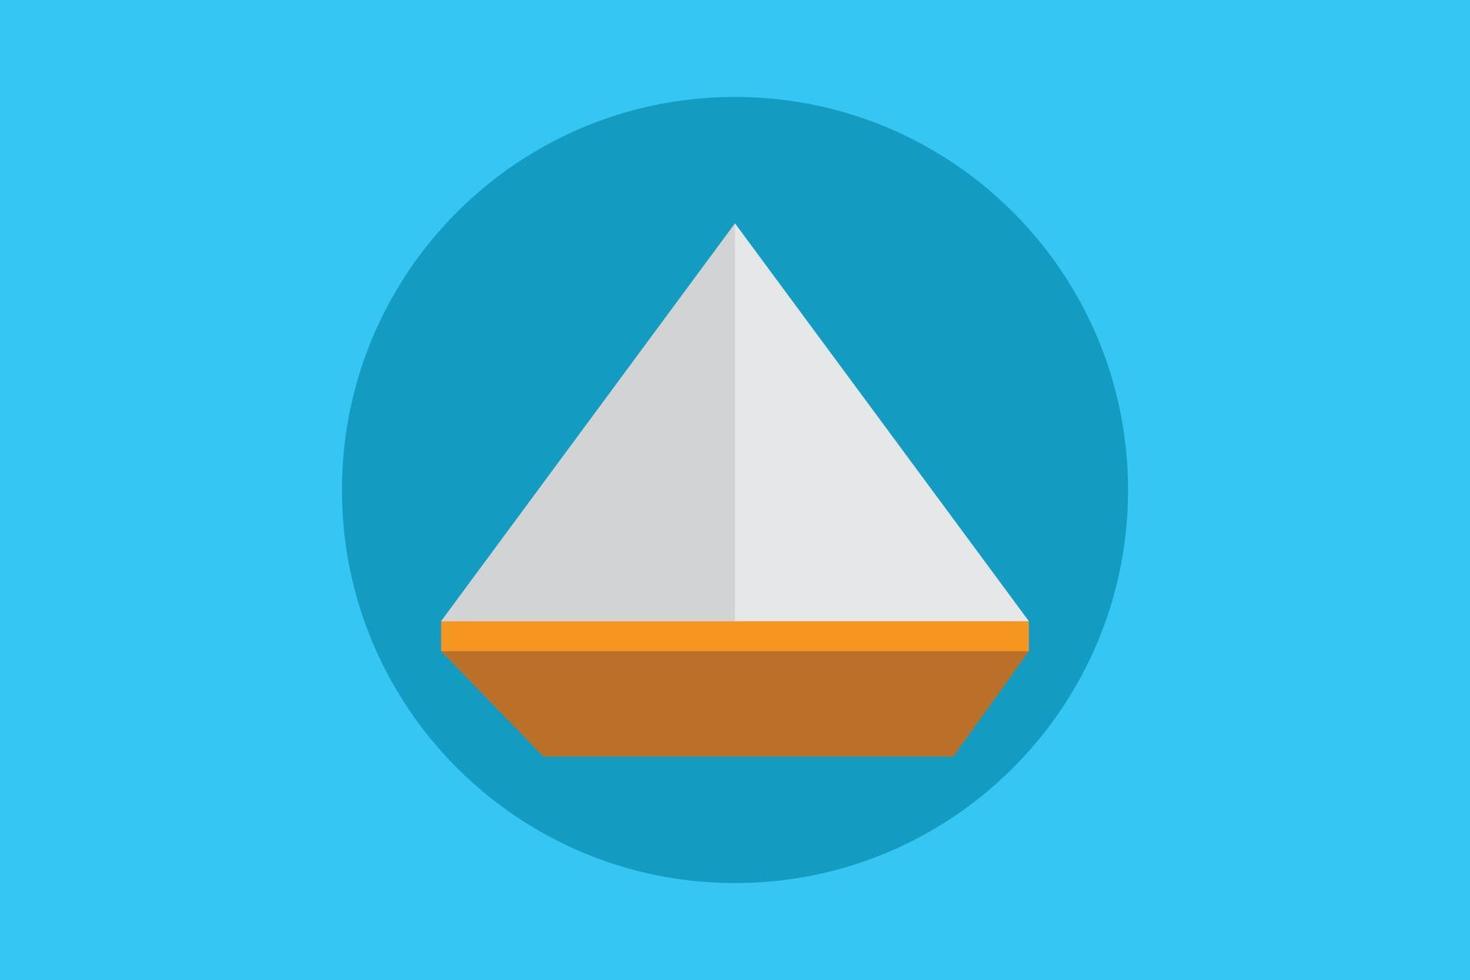 ship icon flat style with blue background vector